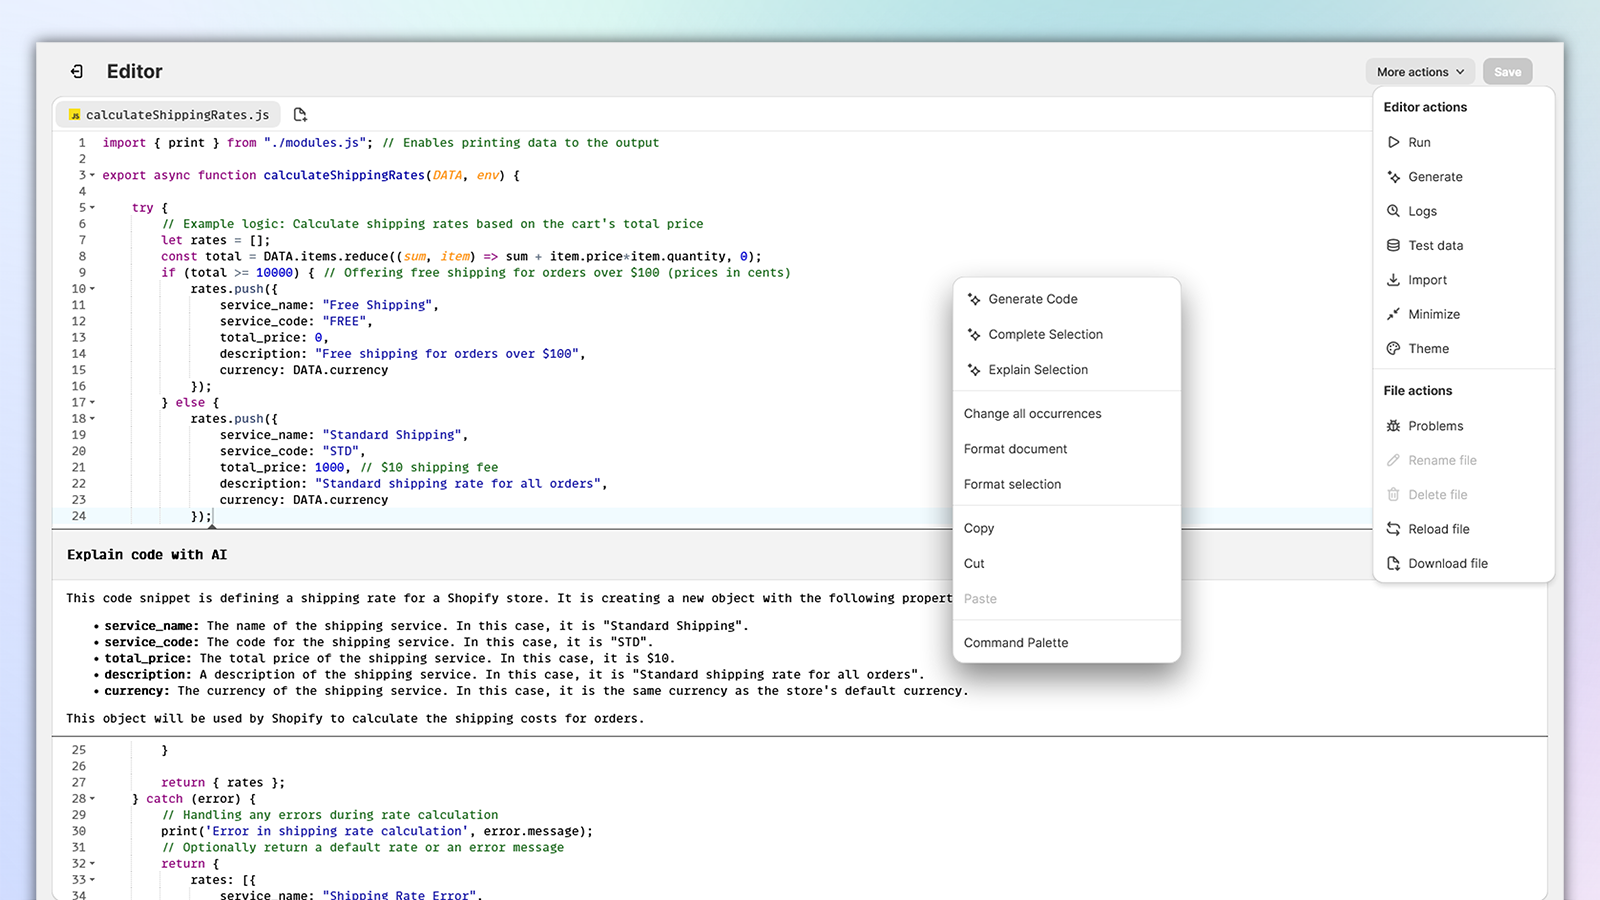 JsRates app editor page in light theme